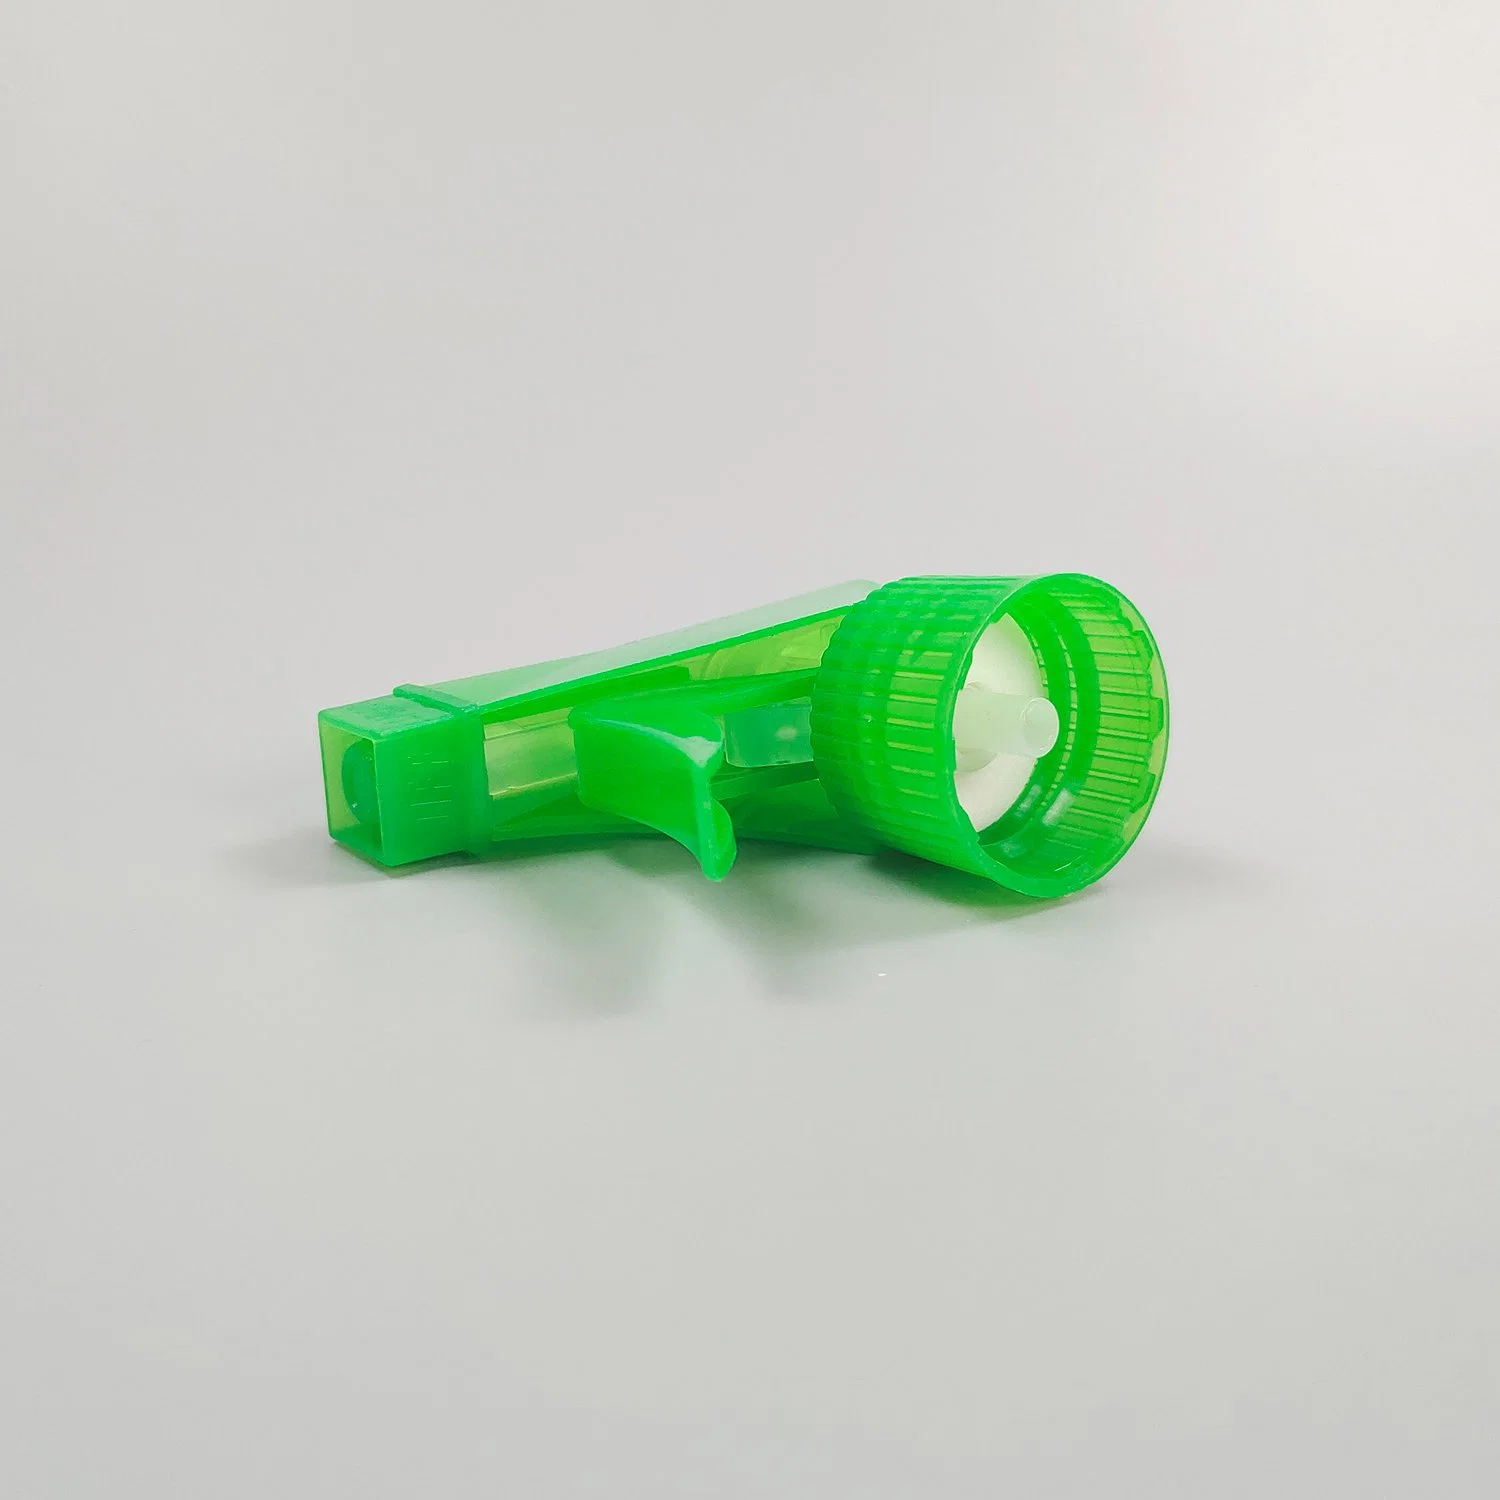 Transparent Green Color Plastic Trigger Sprayer 28mm for Daily Cleaning Household Cleaning